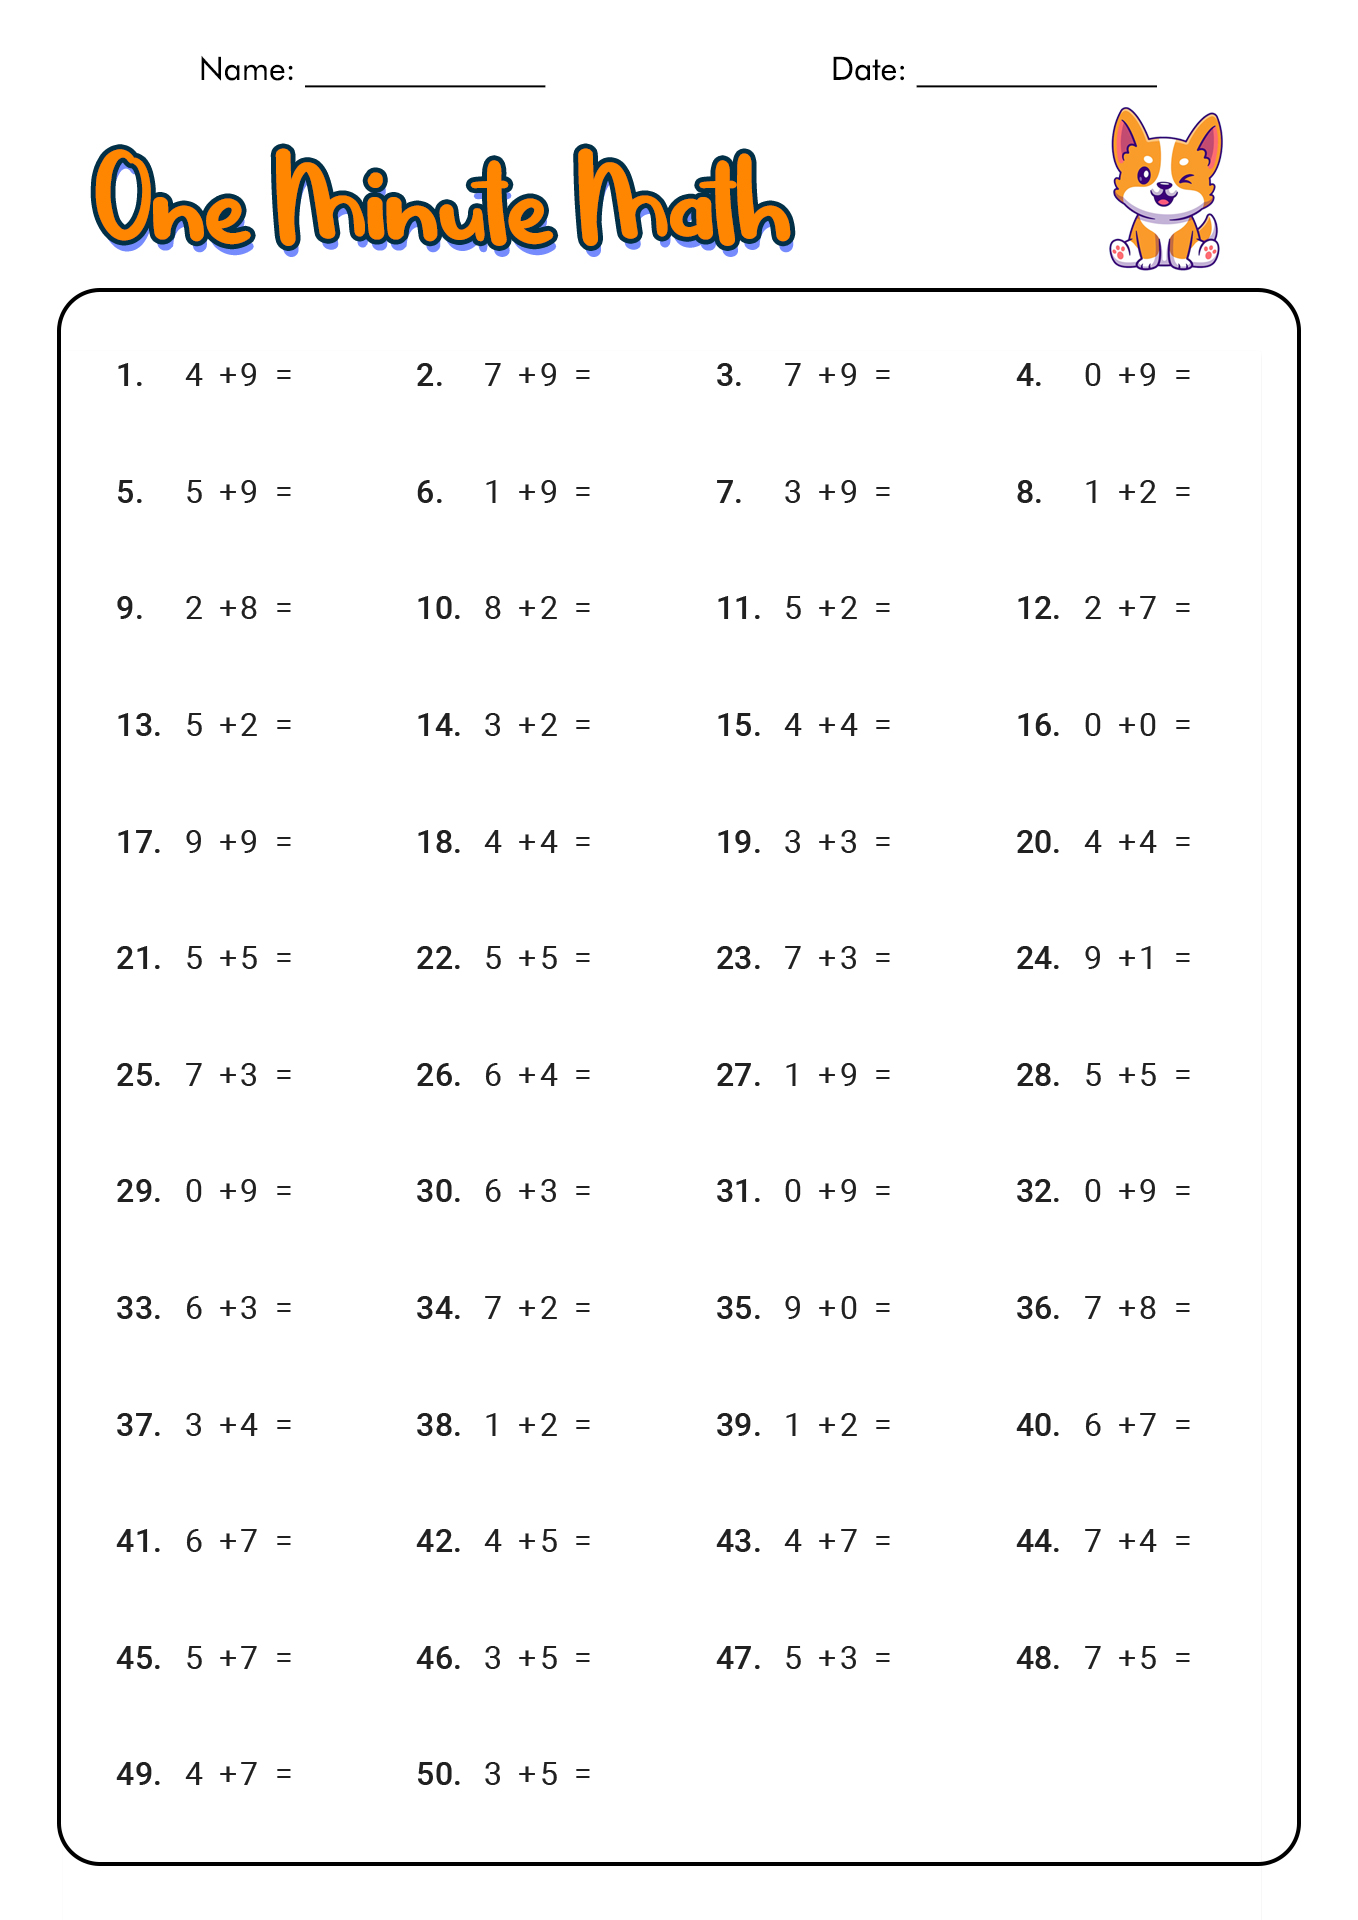 get-2nd-grade-1-minute-math-worksheets-images-rugby-rumilly